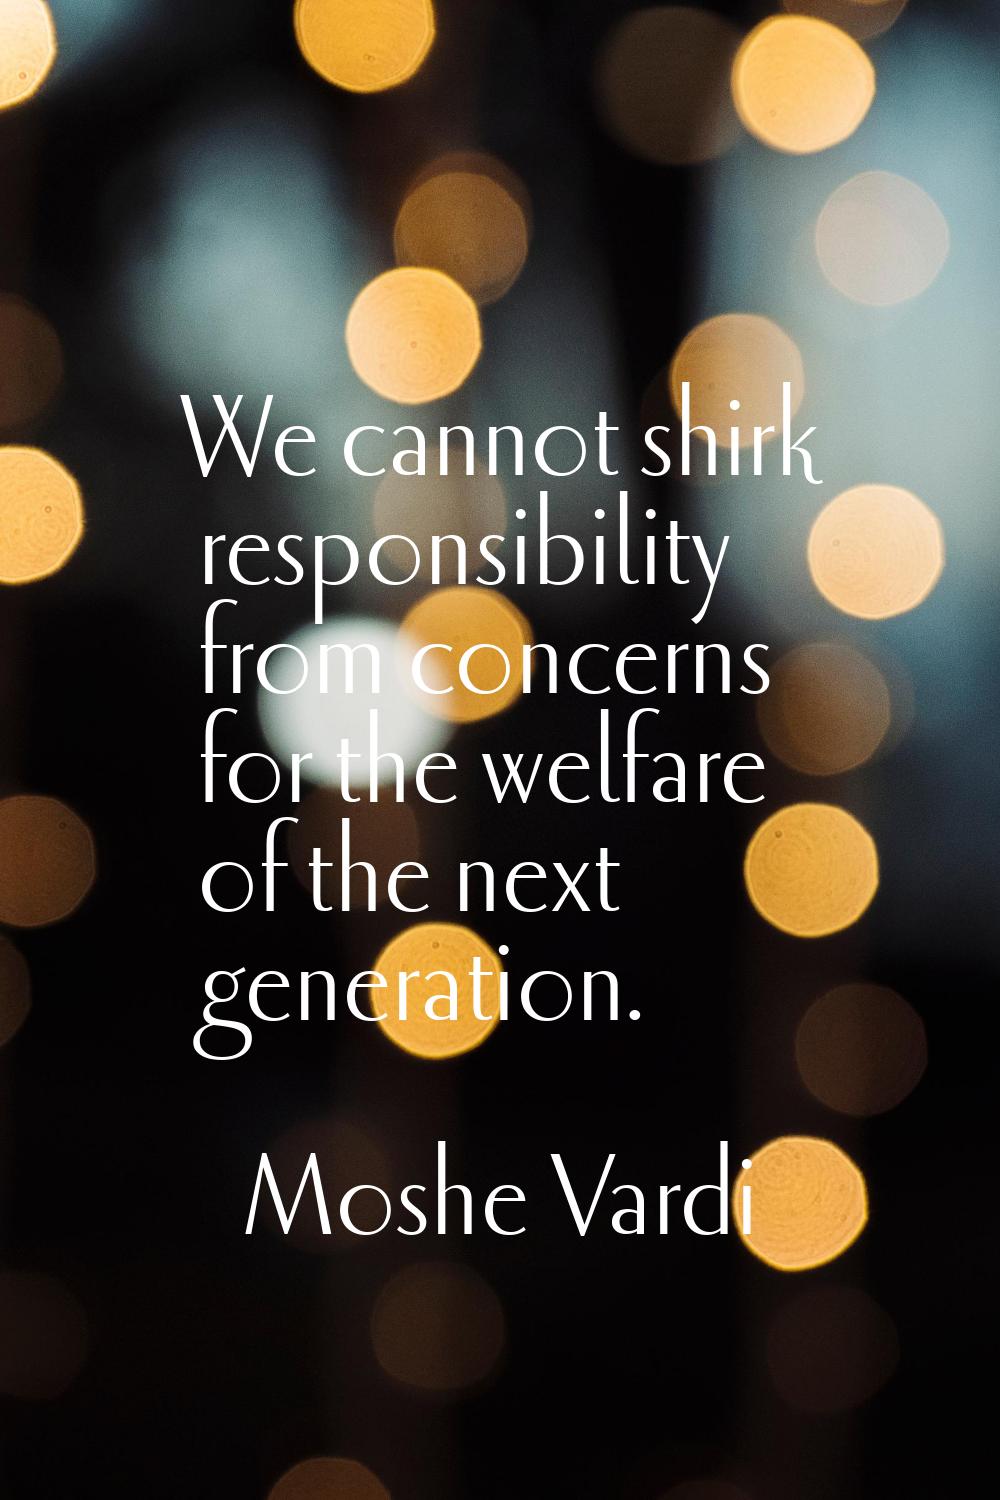 We cannot shirk responsibility from concerns for the welfare of the next generation.